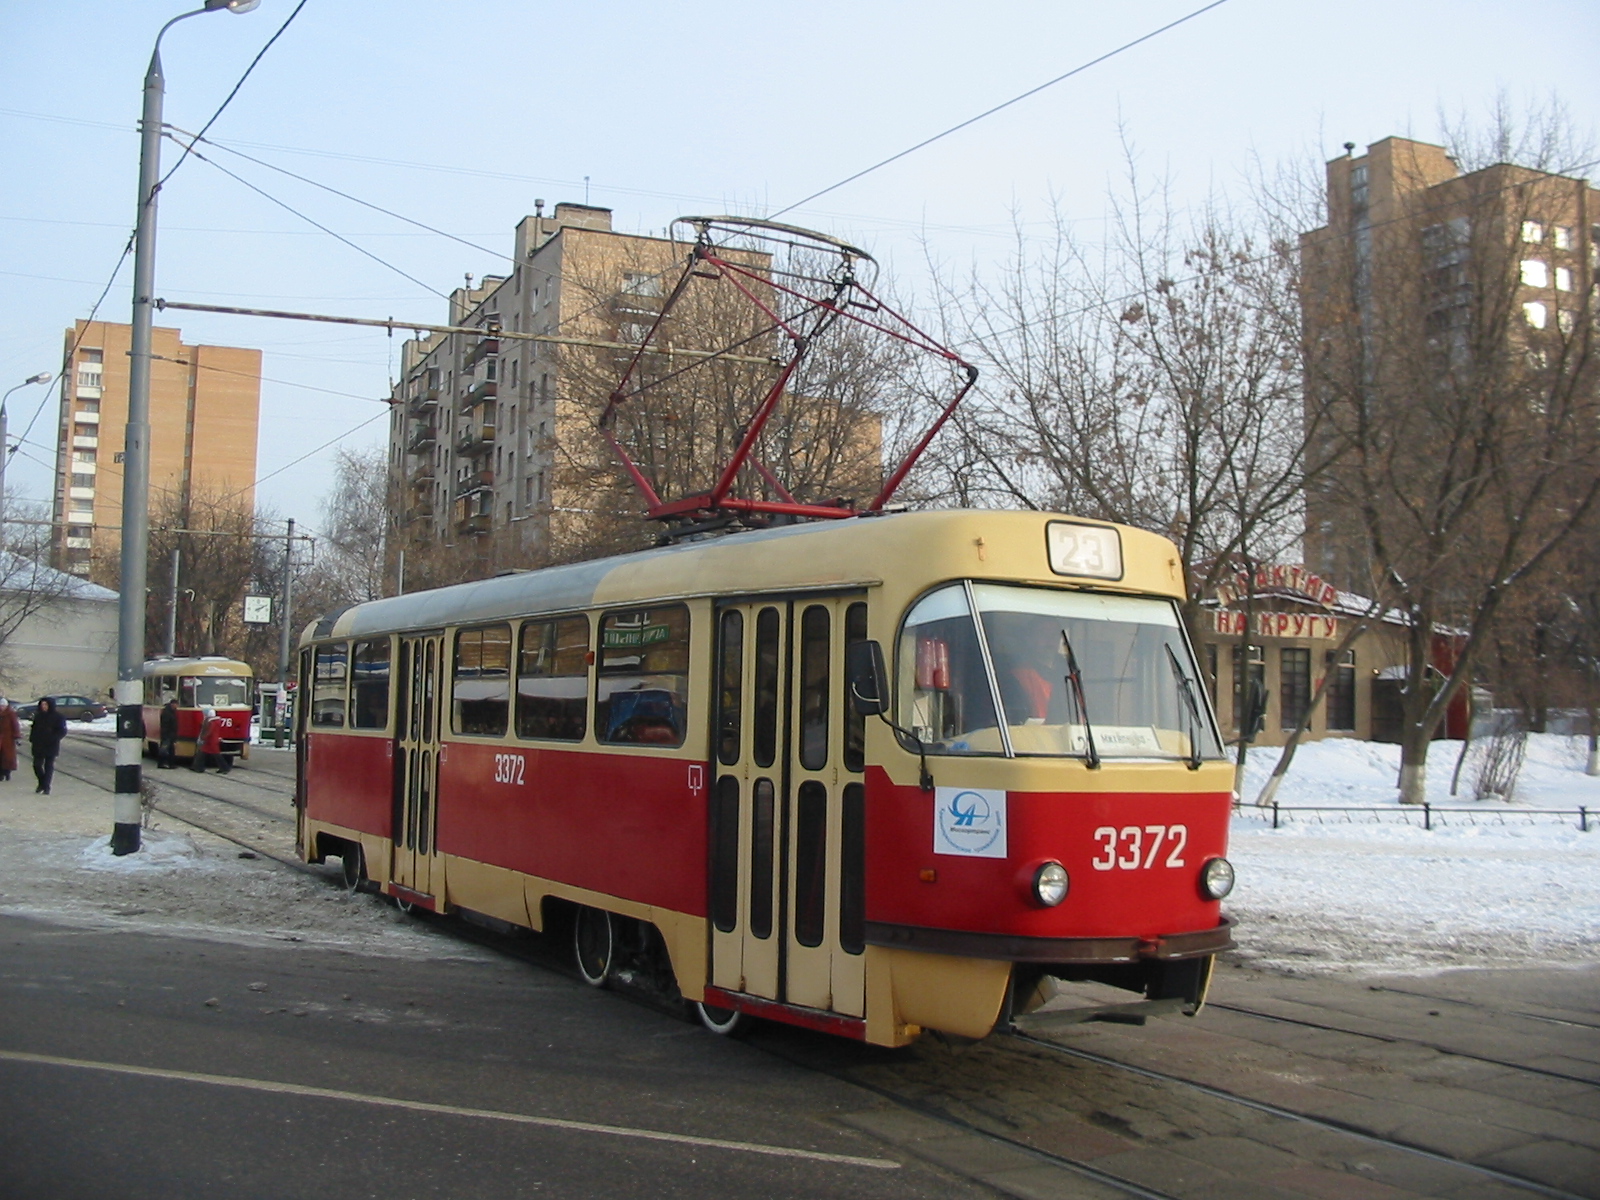 a trolley car that is traveling through the snow